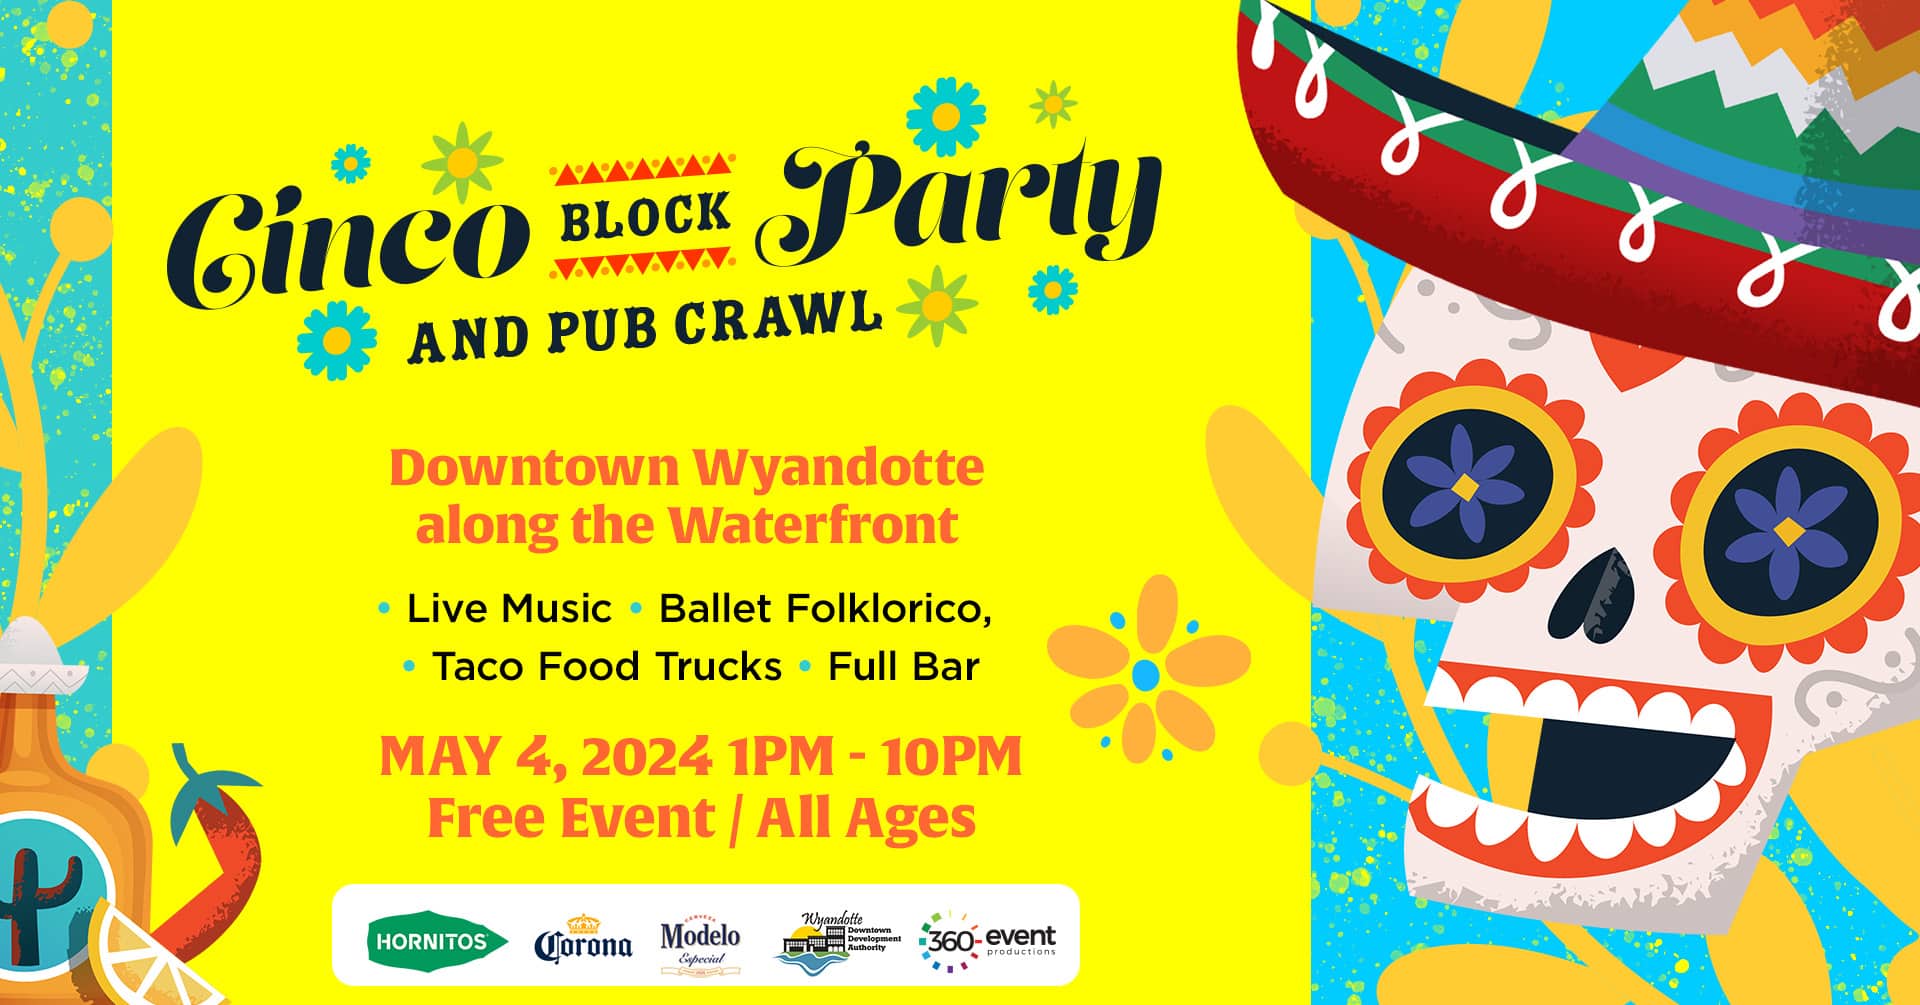 Cinco Block Party and Pub Crawl, Downtown Wyandotte along the waterfront, live music, ballet folklorico, taco food trucks, full bar, May 4, 2024, 1pm to 10pm, Free Event, All Ages; sponsor logos Hornitos, Corona, Modelo, Wyandotte DDA, 360 Event Productions; graphic of Día de los Muertos skull with sombrero